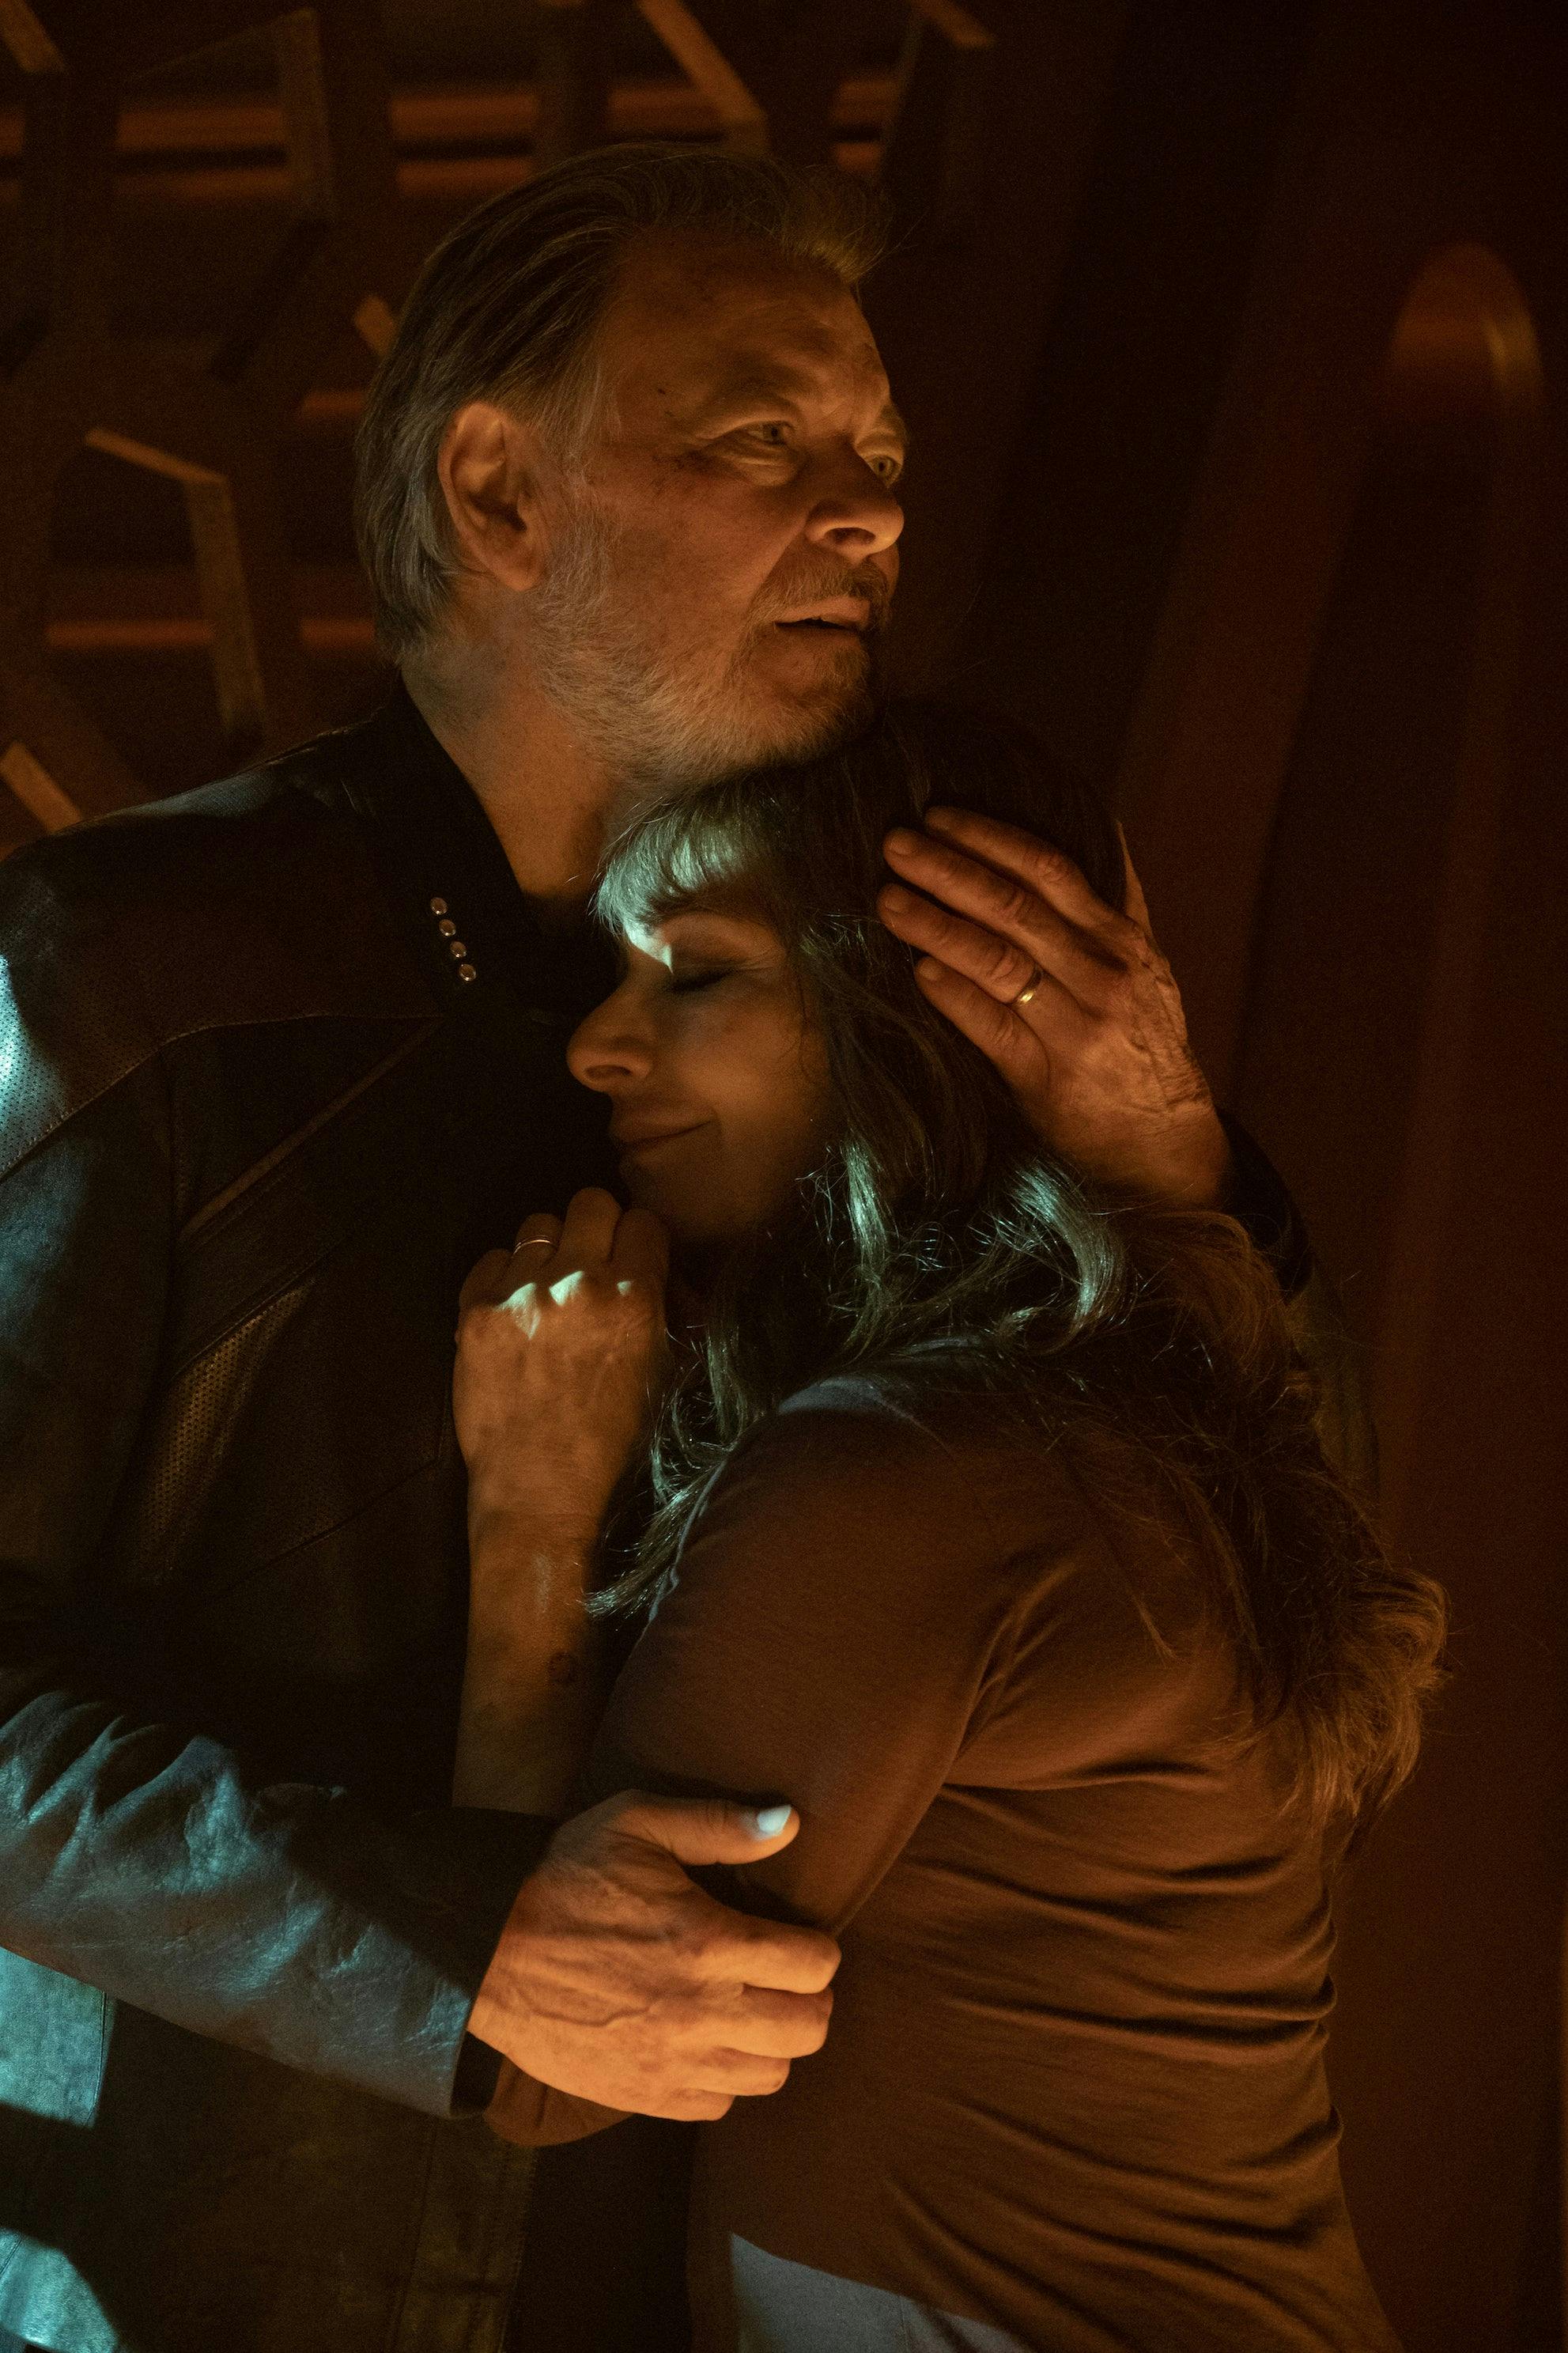 A battered Will Riker holds Deanna Troi in his arms, embracing her, as she smiles in comfort on the Shrike